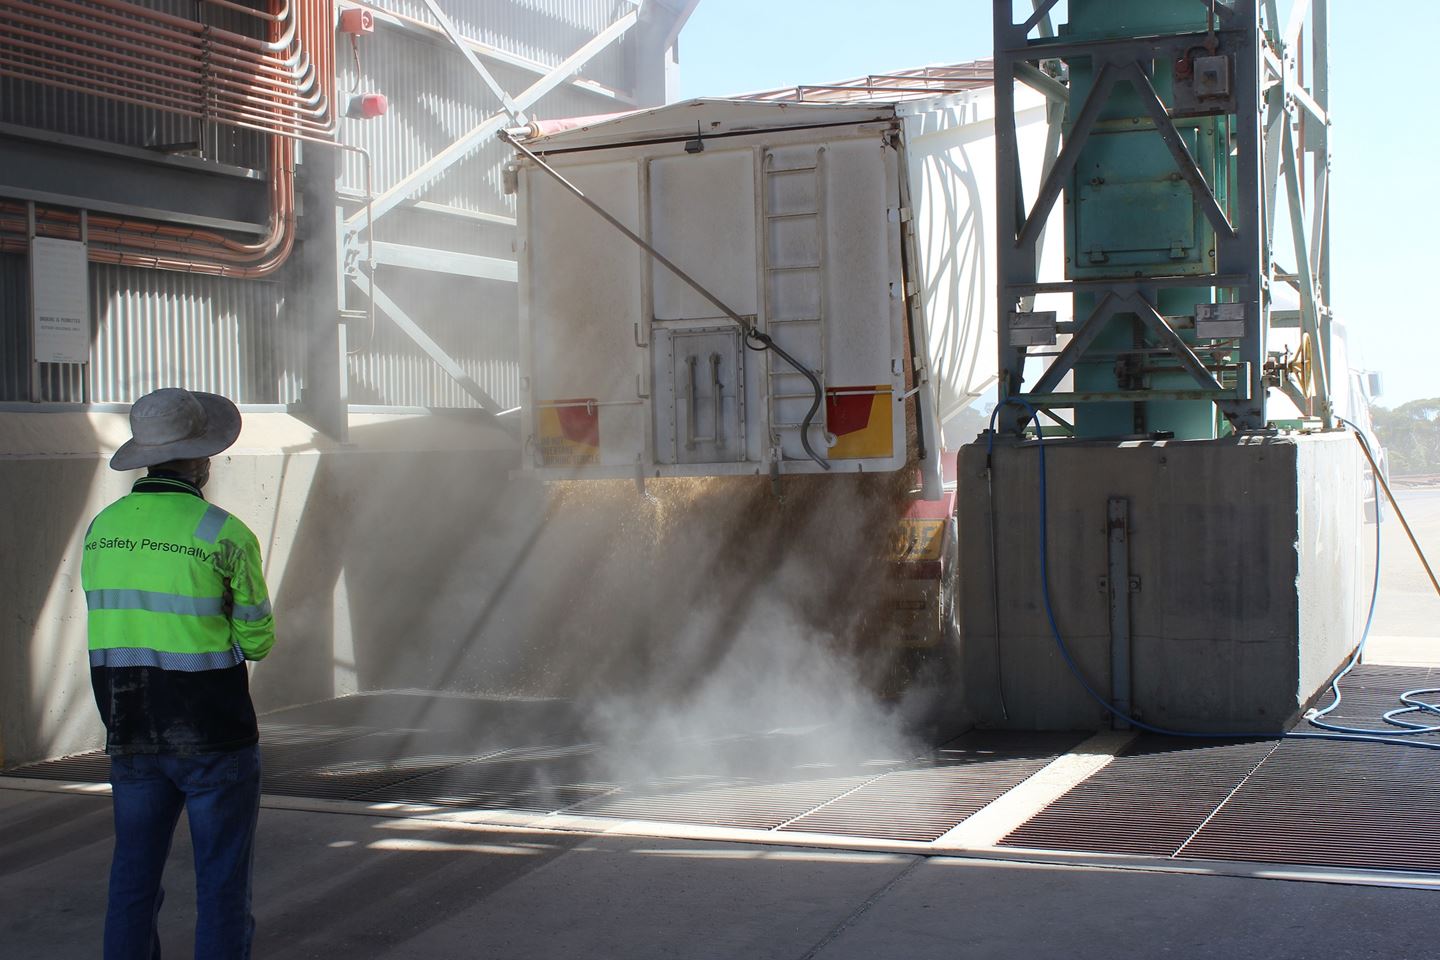 A photo of a truck unloading grain at the Wyalkatchem receival site